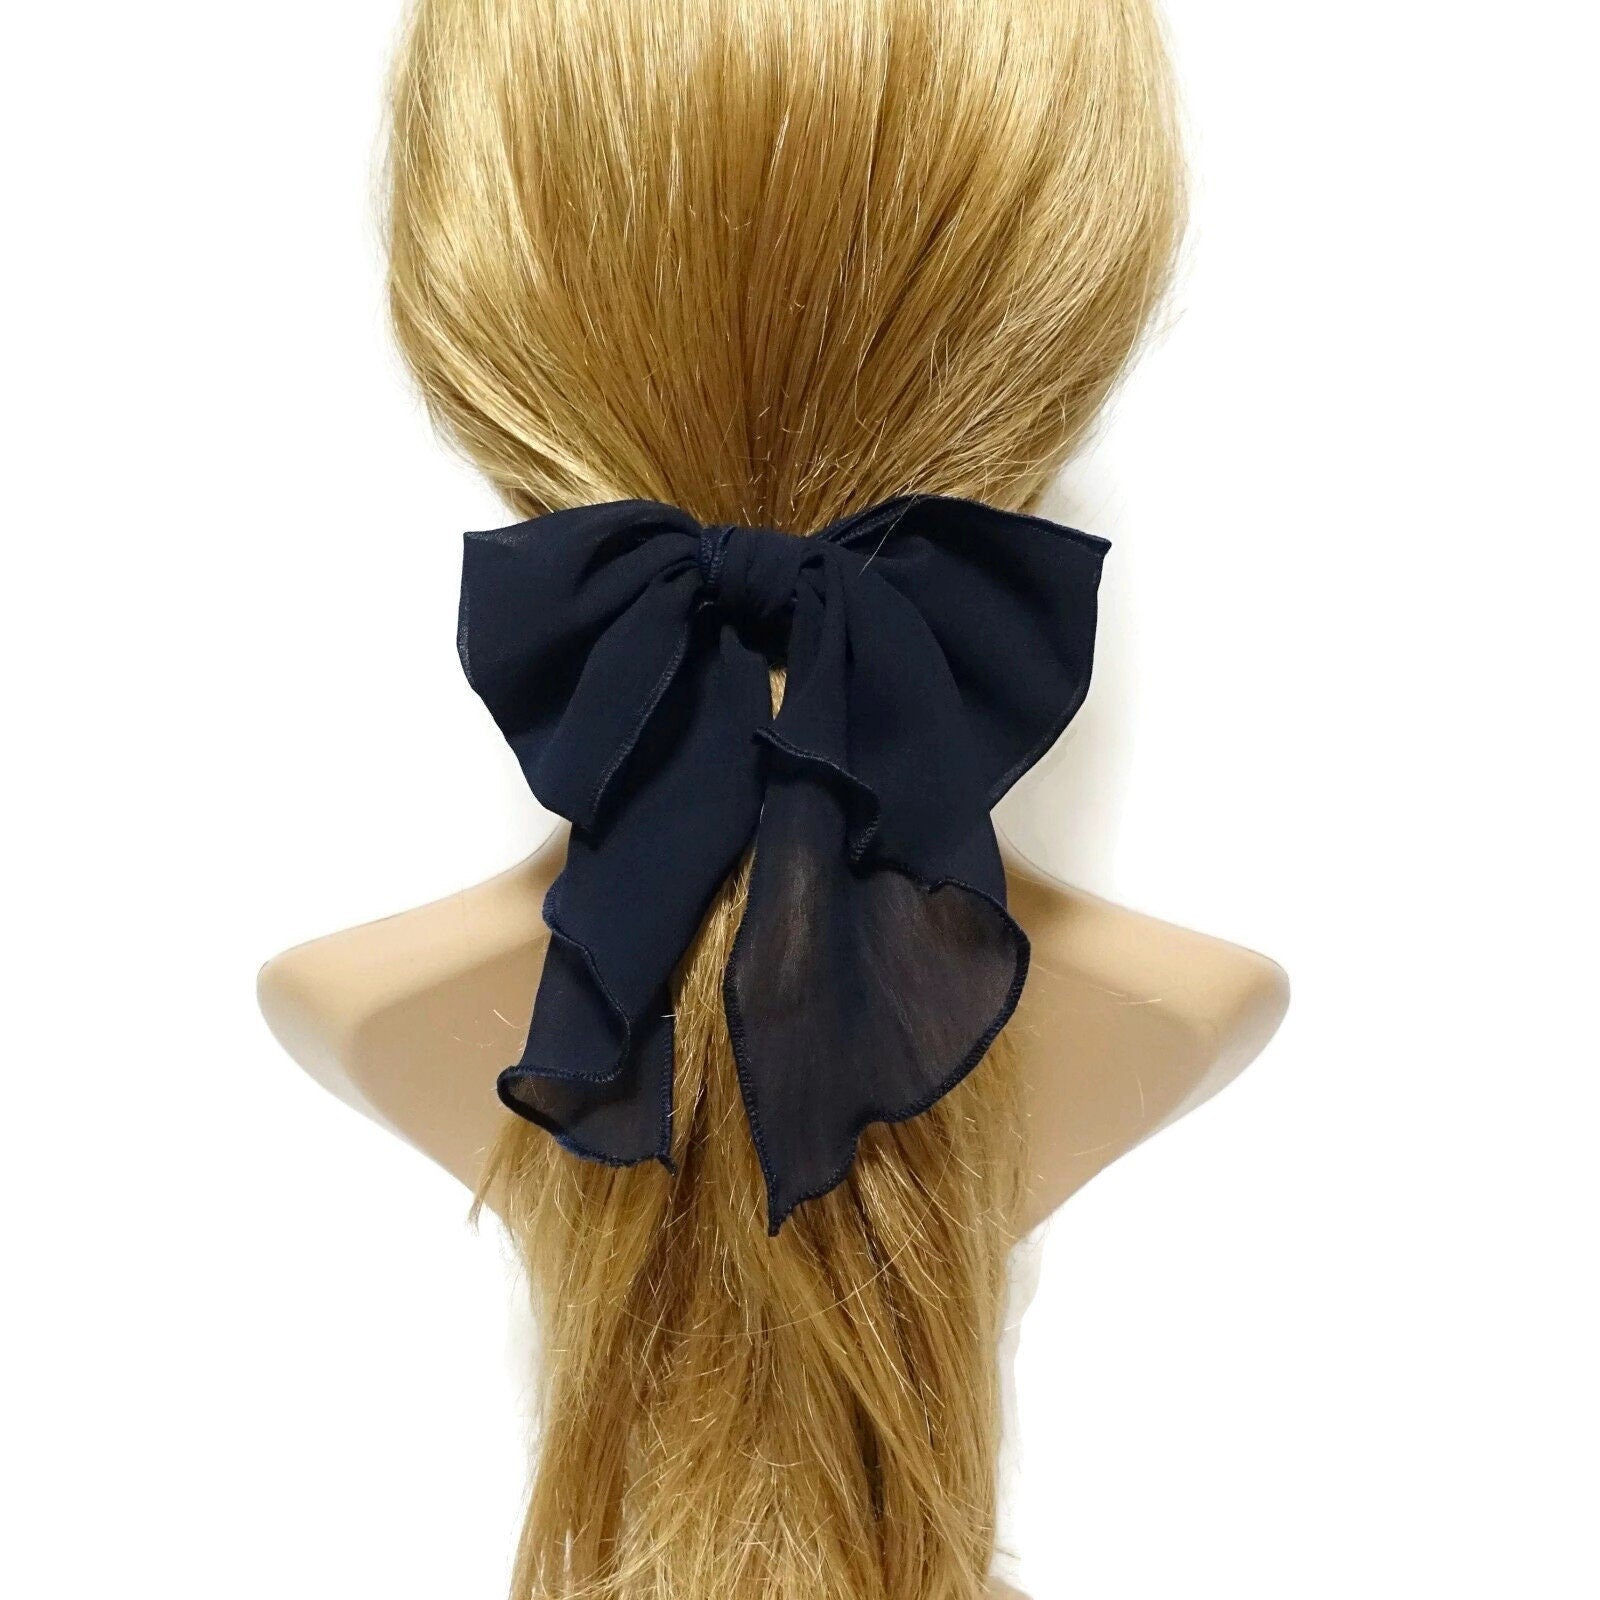 veryshine.com Scrunchies Chiffon solid color bow knot hair tie elastic ponytail holder for women